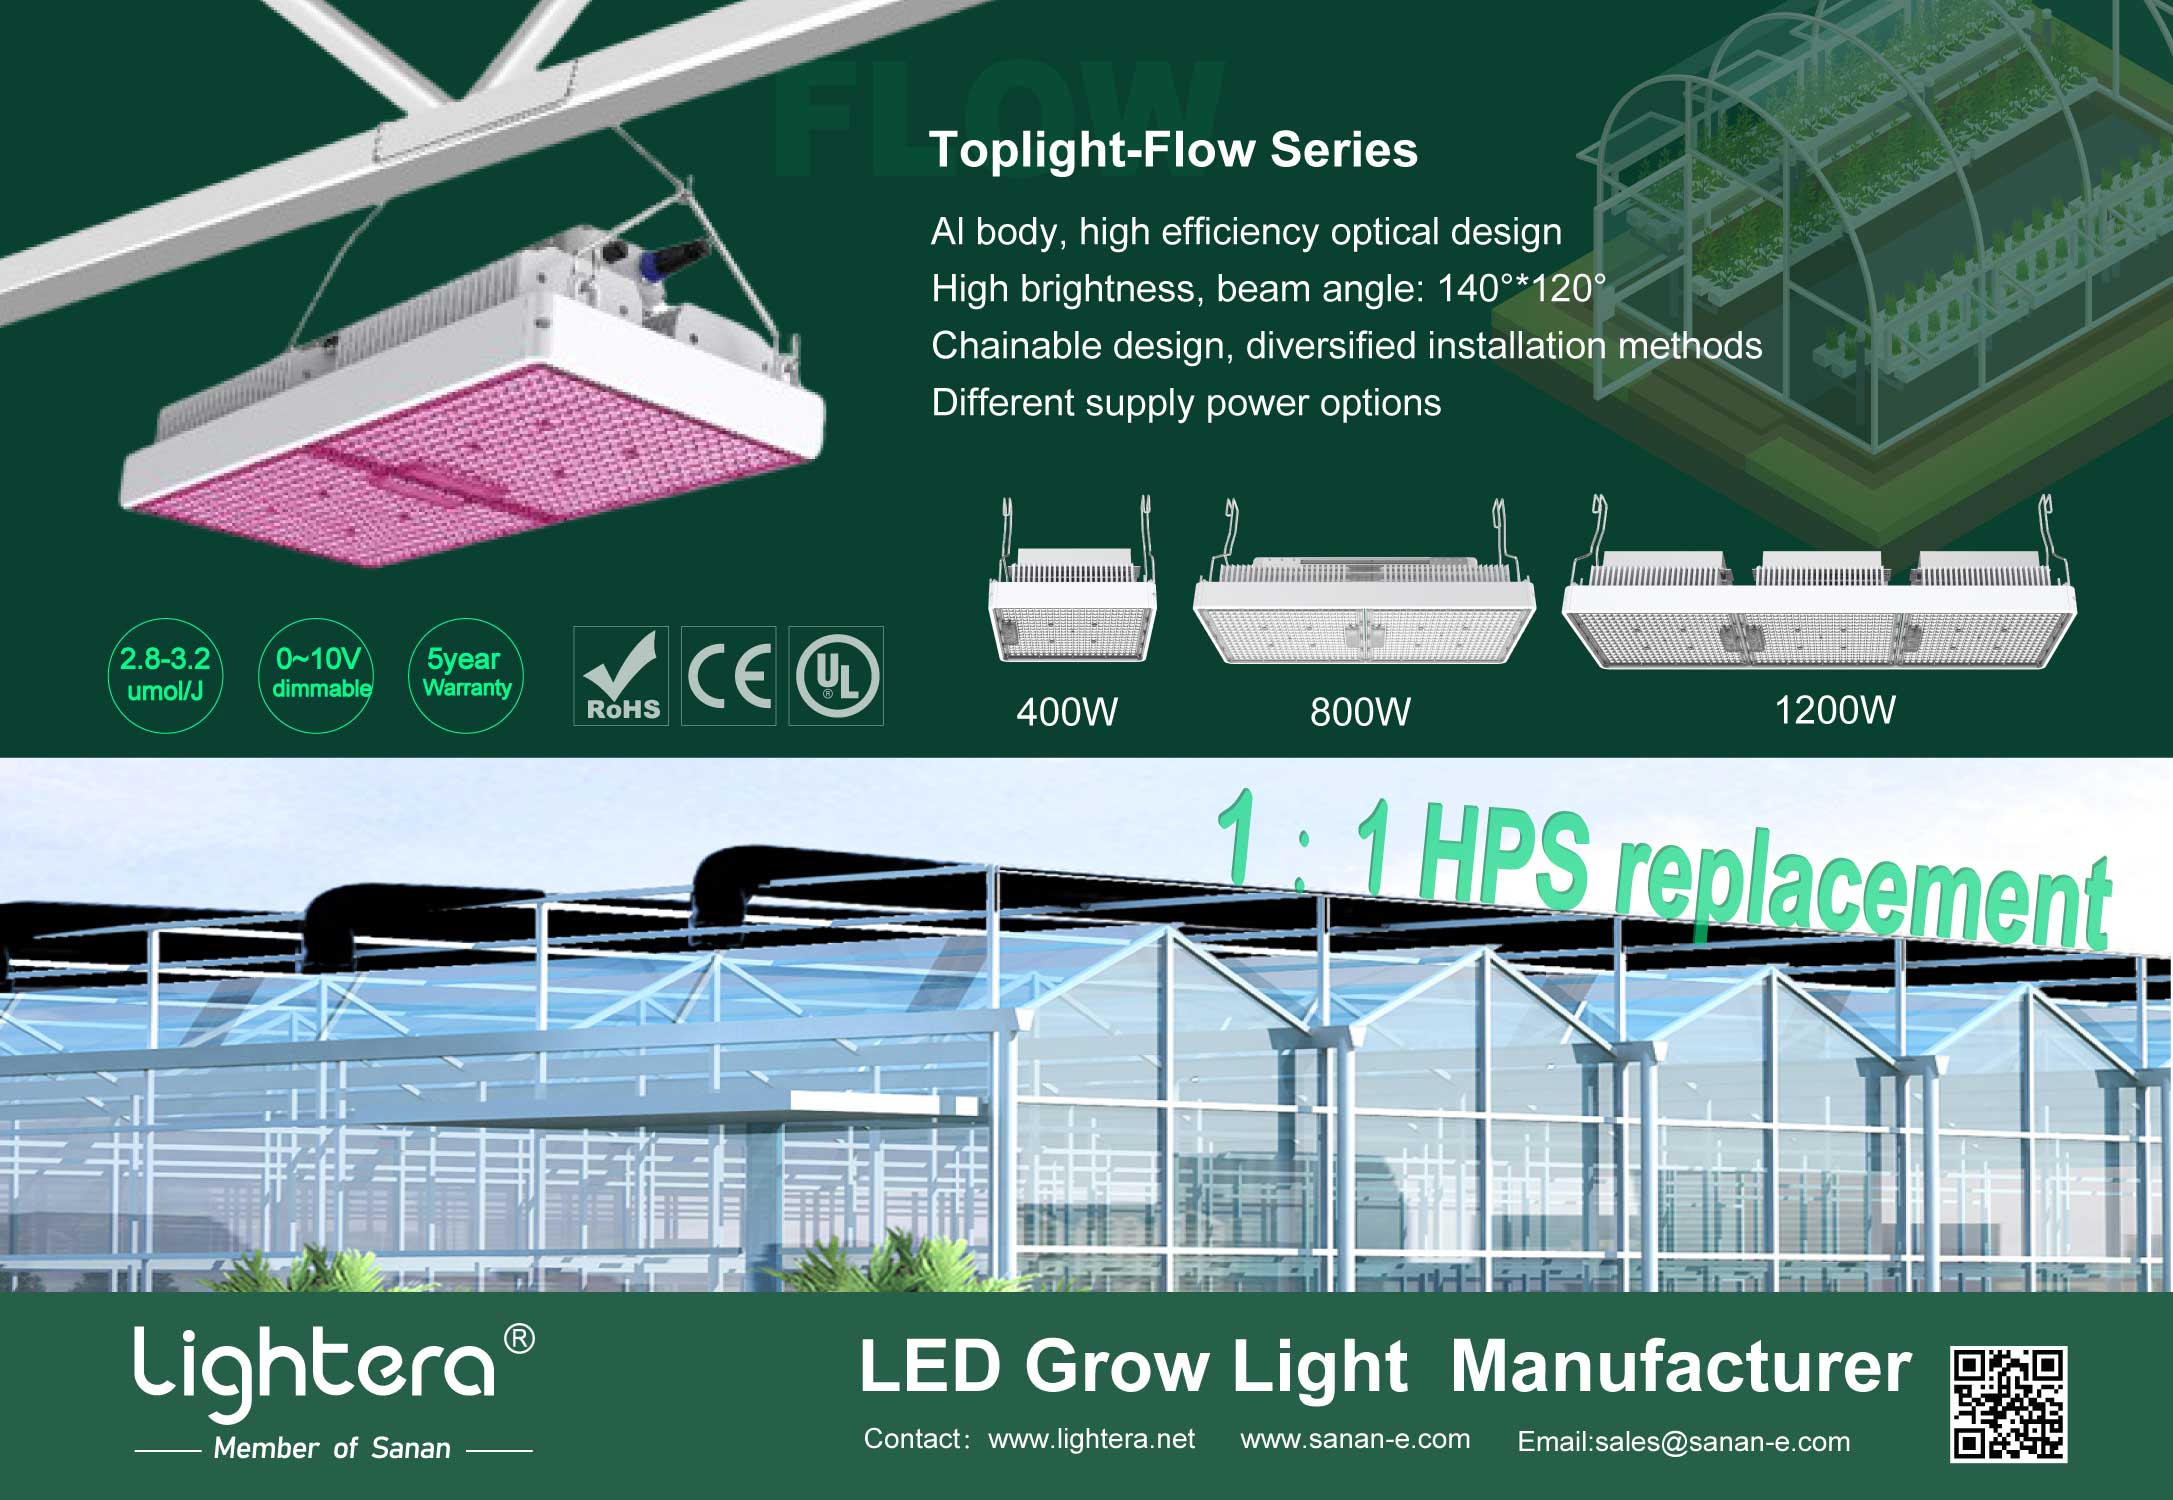 conventional HPS lamps